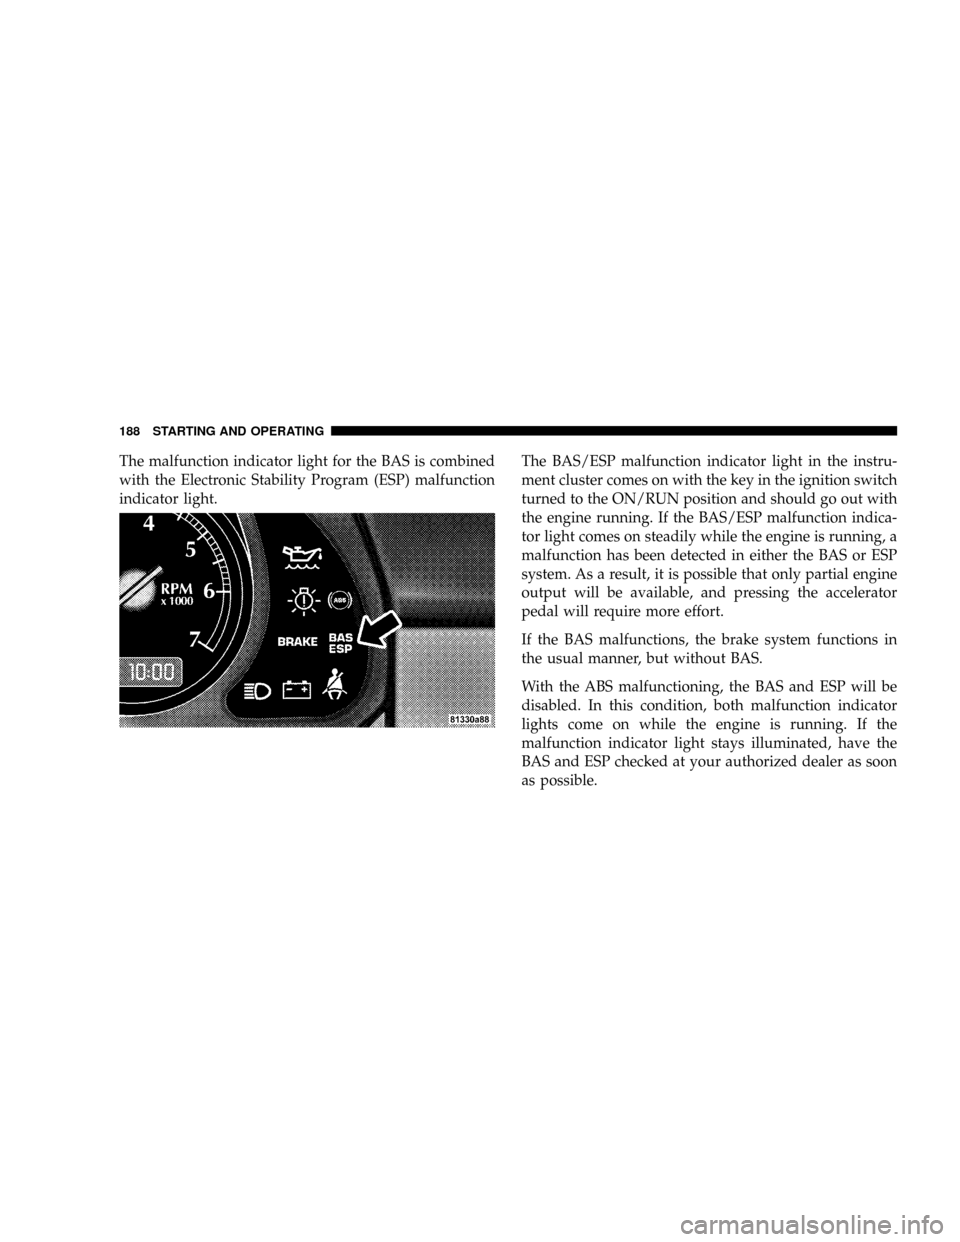 CHRYSLER CROSSFIRE 2008 1.G Owners Manual The malfunction indicator light for the BAS is combined
with the Electronic Stability Program (ESP) malfunction
indicator light.The BAS/ESP malfunction indicator light in the instru-
ment cluster come